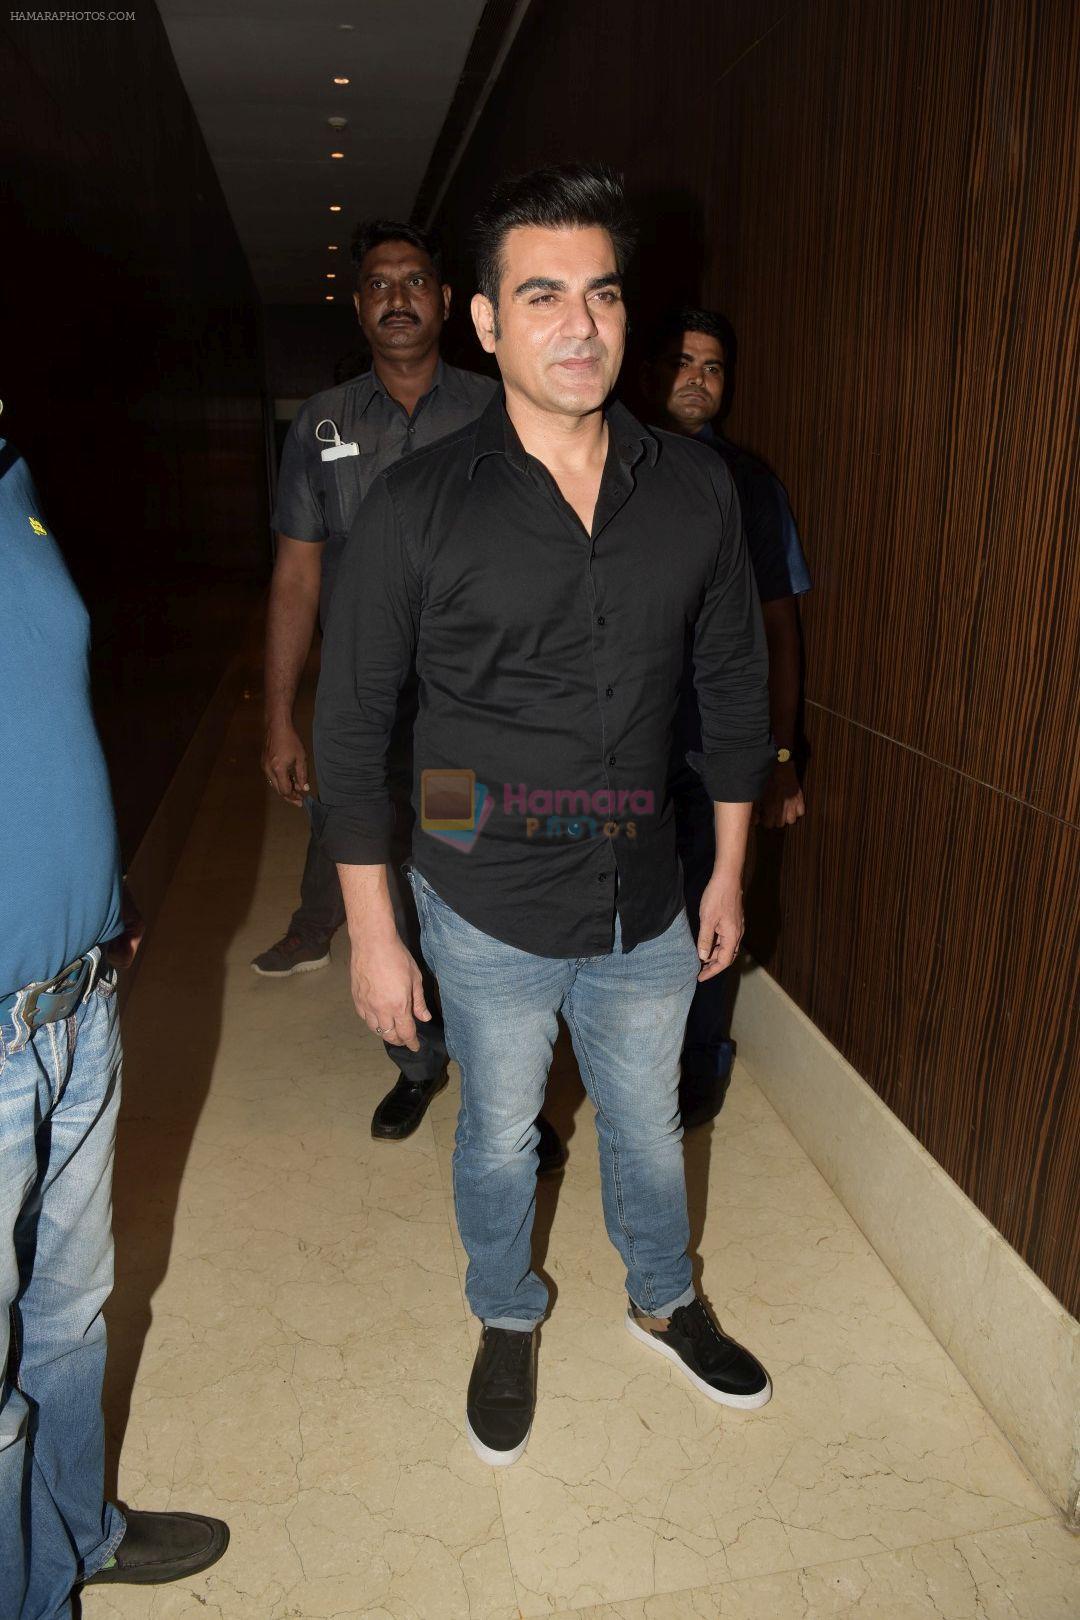 Arbaaz Khan at The Music Launch Of Film Krina on 4th Oct 2017